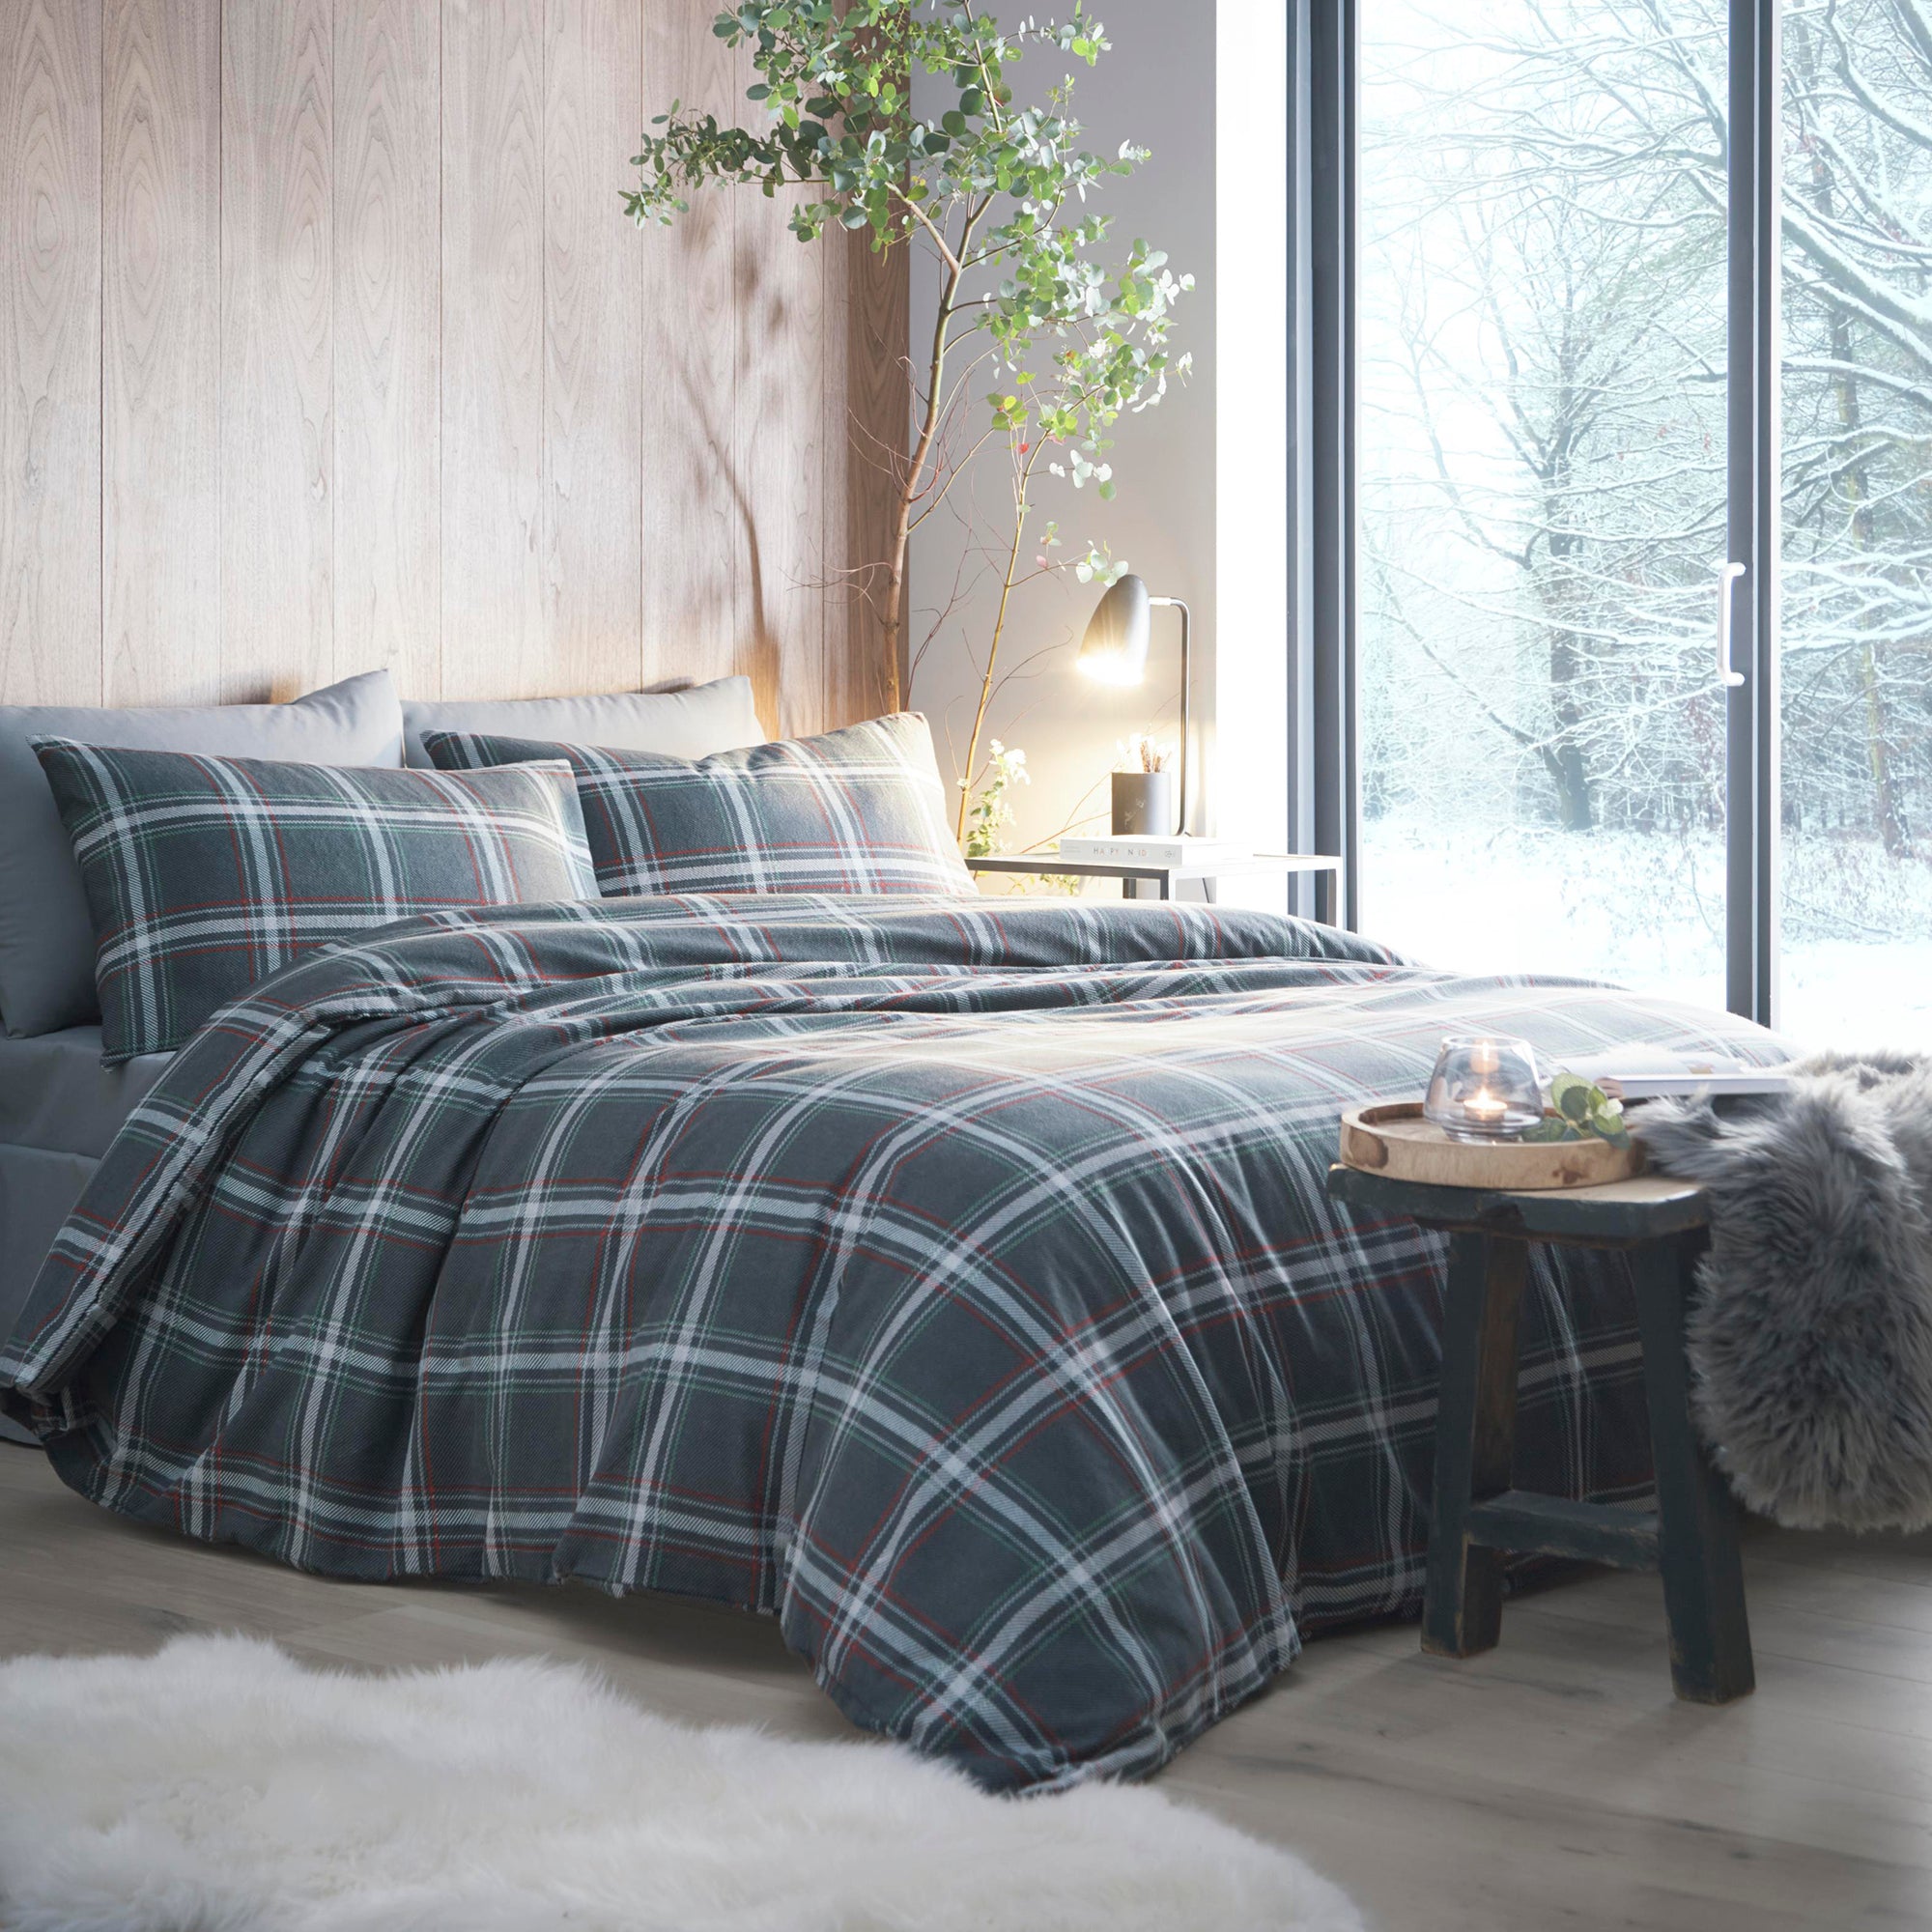 Aviemore - 100% Cotton Duvet Cover Set in Charcoal - by Appletree Hygge